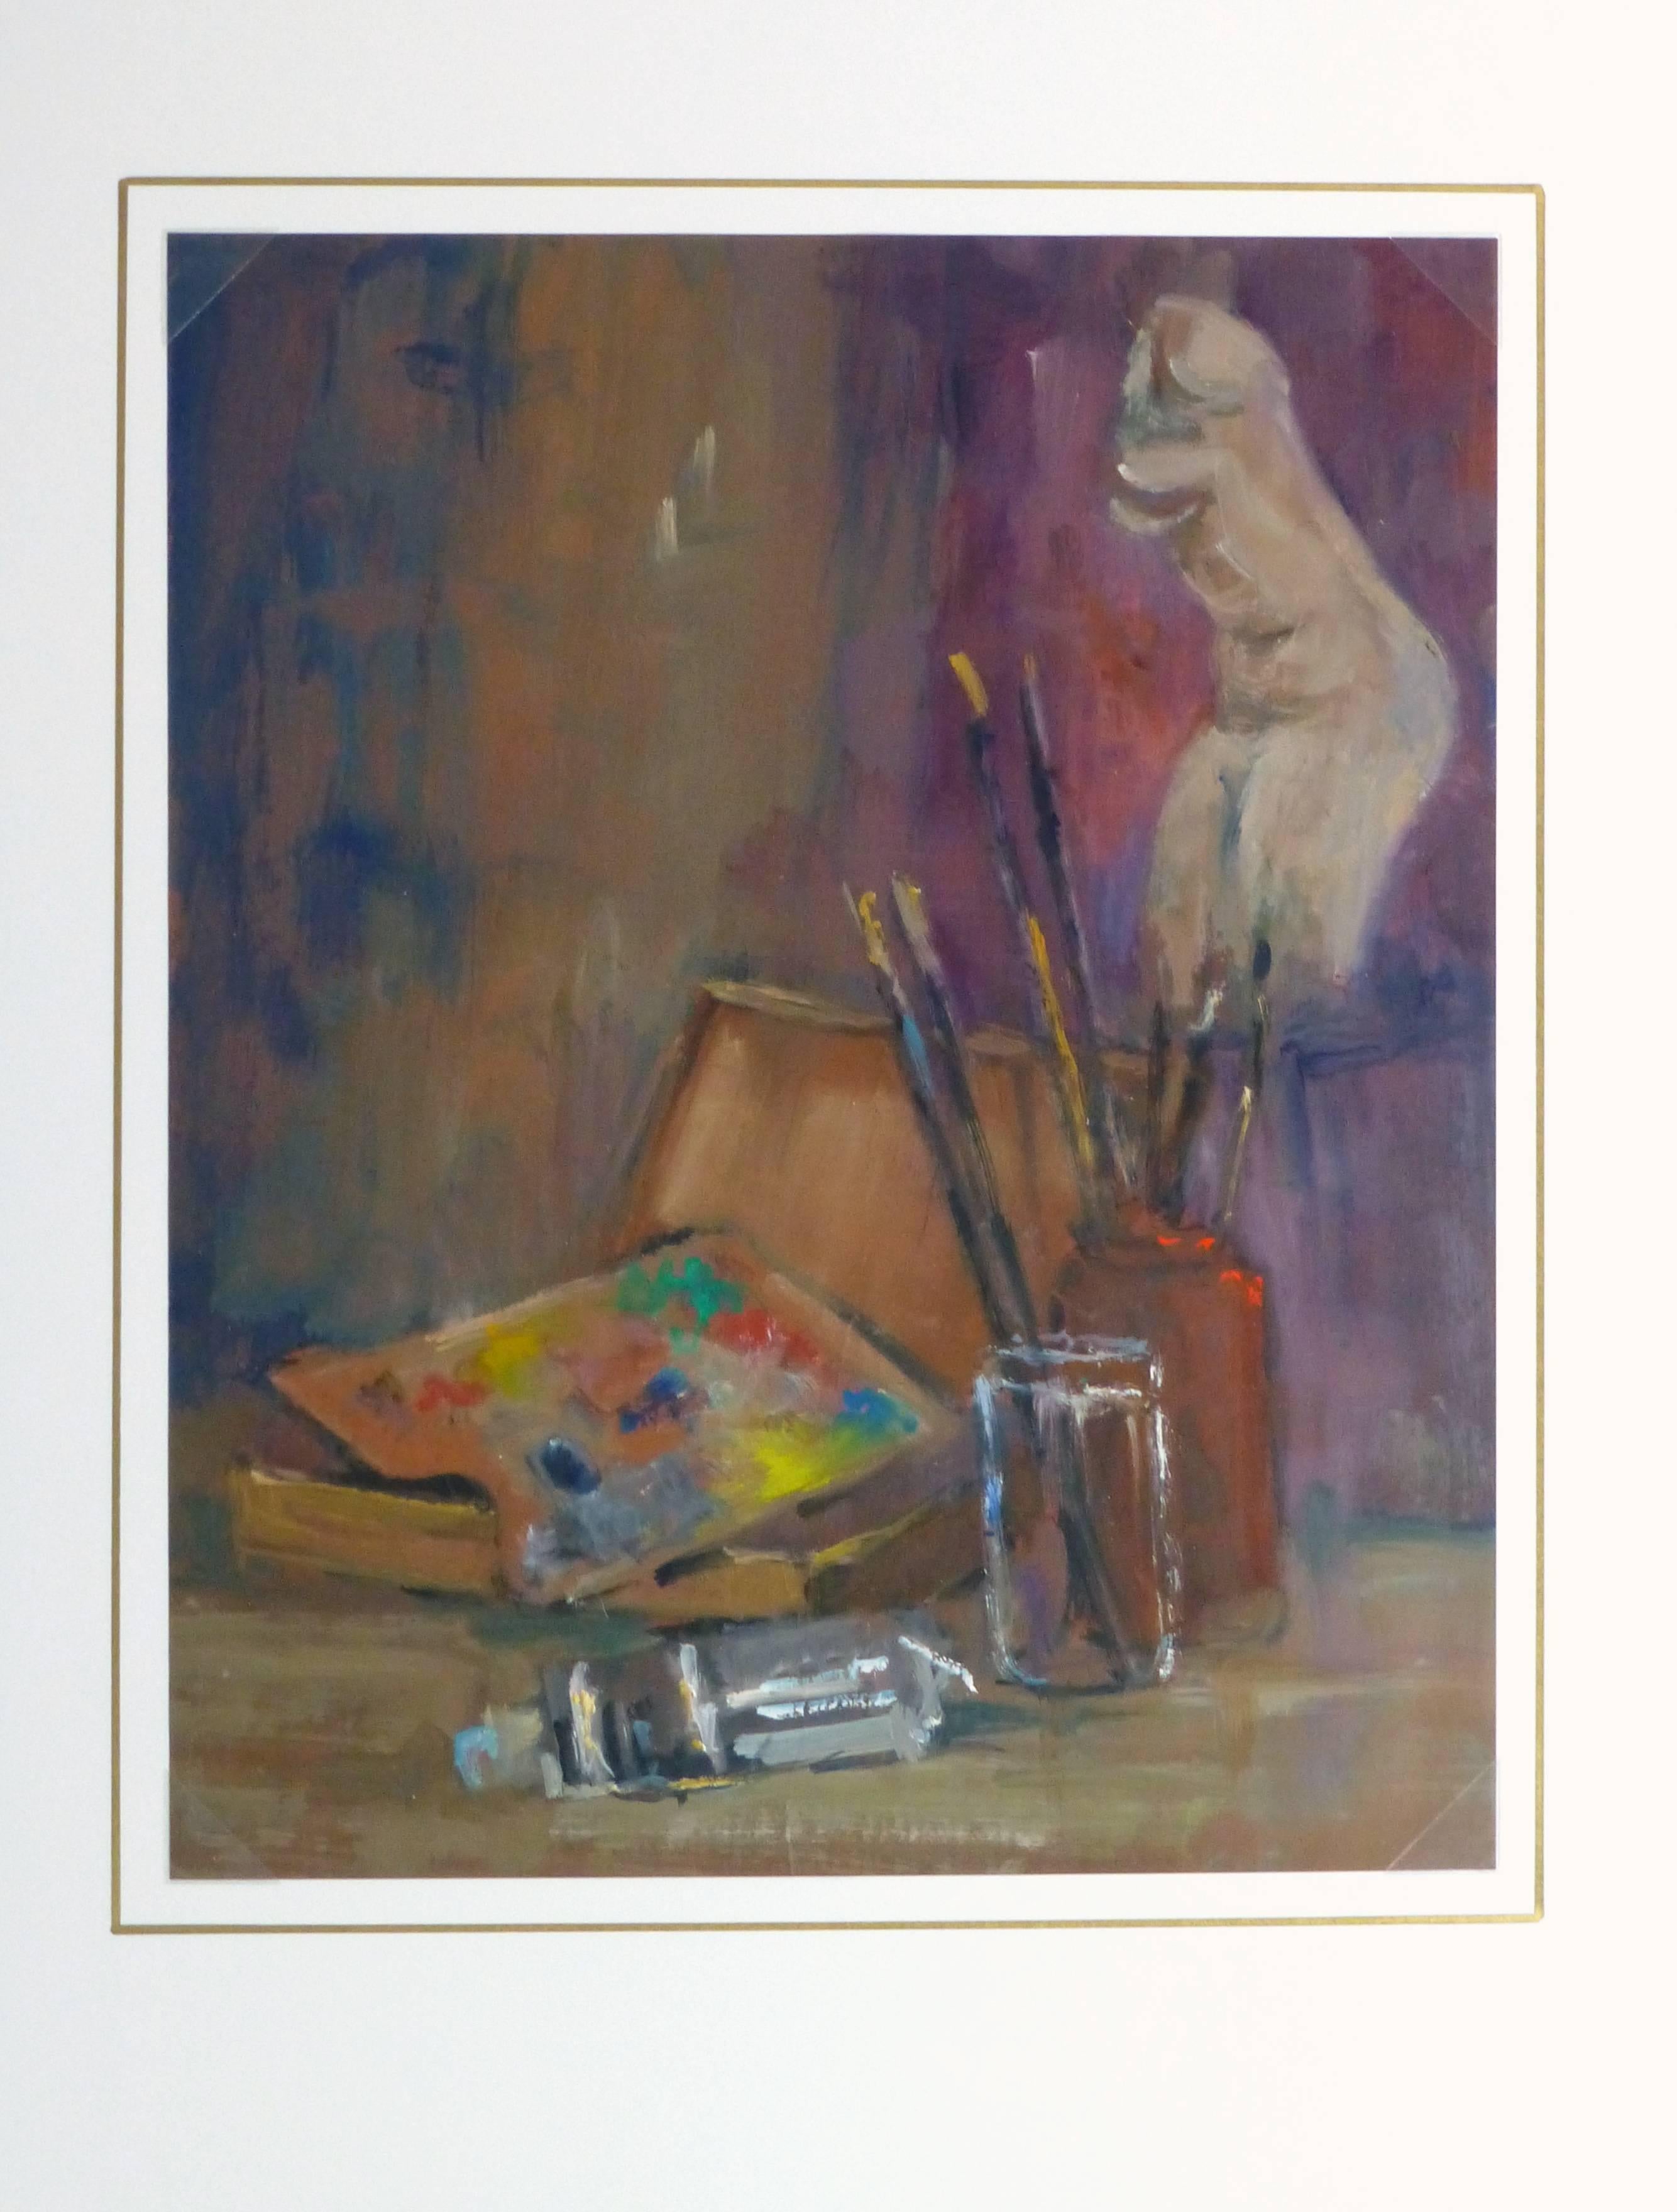 Oil on paper still life painting of an artist's supplies coupled with a mannequin bust by French artist Raymond Bailly, circa 1965. 

Original artwork on paper displayed on a white mat with a gold border. Archival plastic sleeve and Certificate of